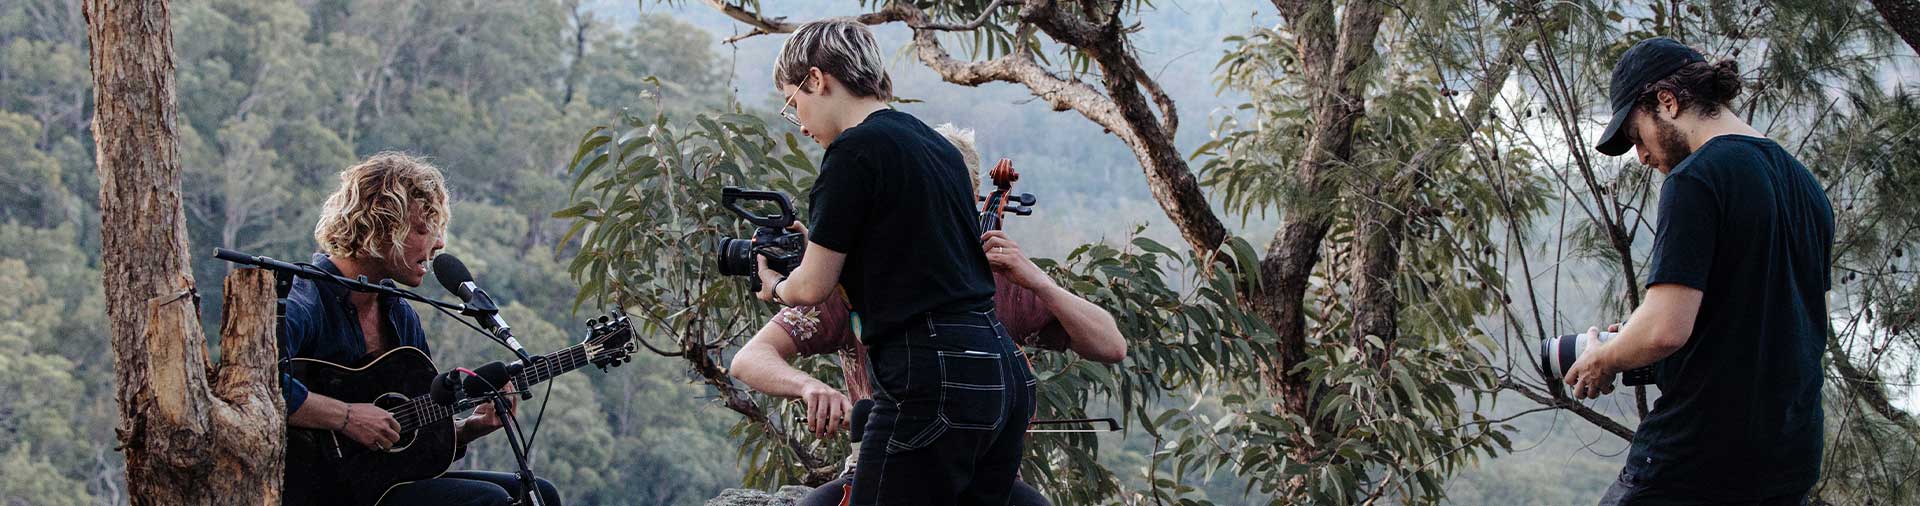 director-of-photography-kate-cornish-tests-canons-new-eos-c70-filming-musician-kim-churchill-in-bushland-setting